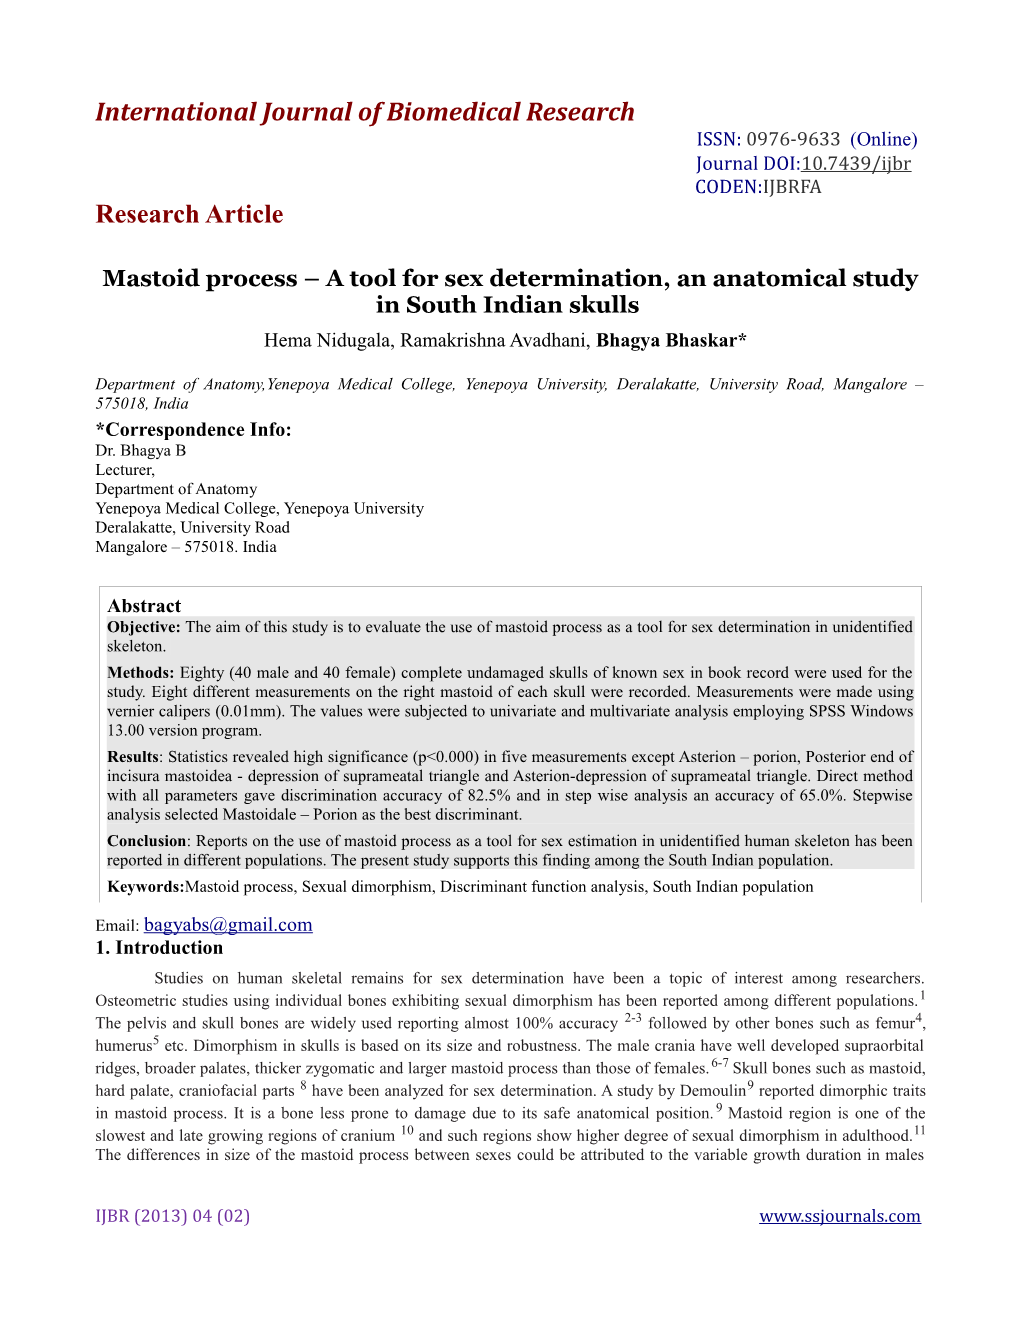 International Journal of Biomedical Research Research Article